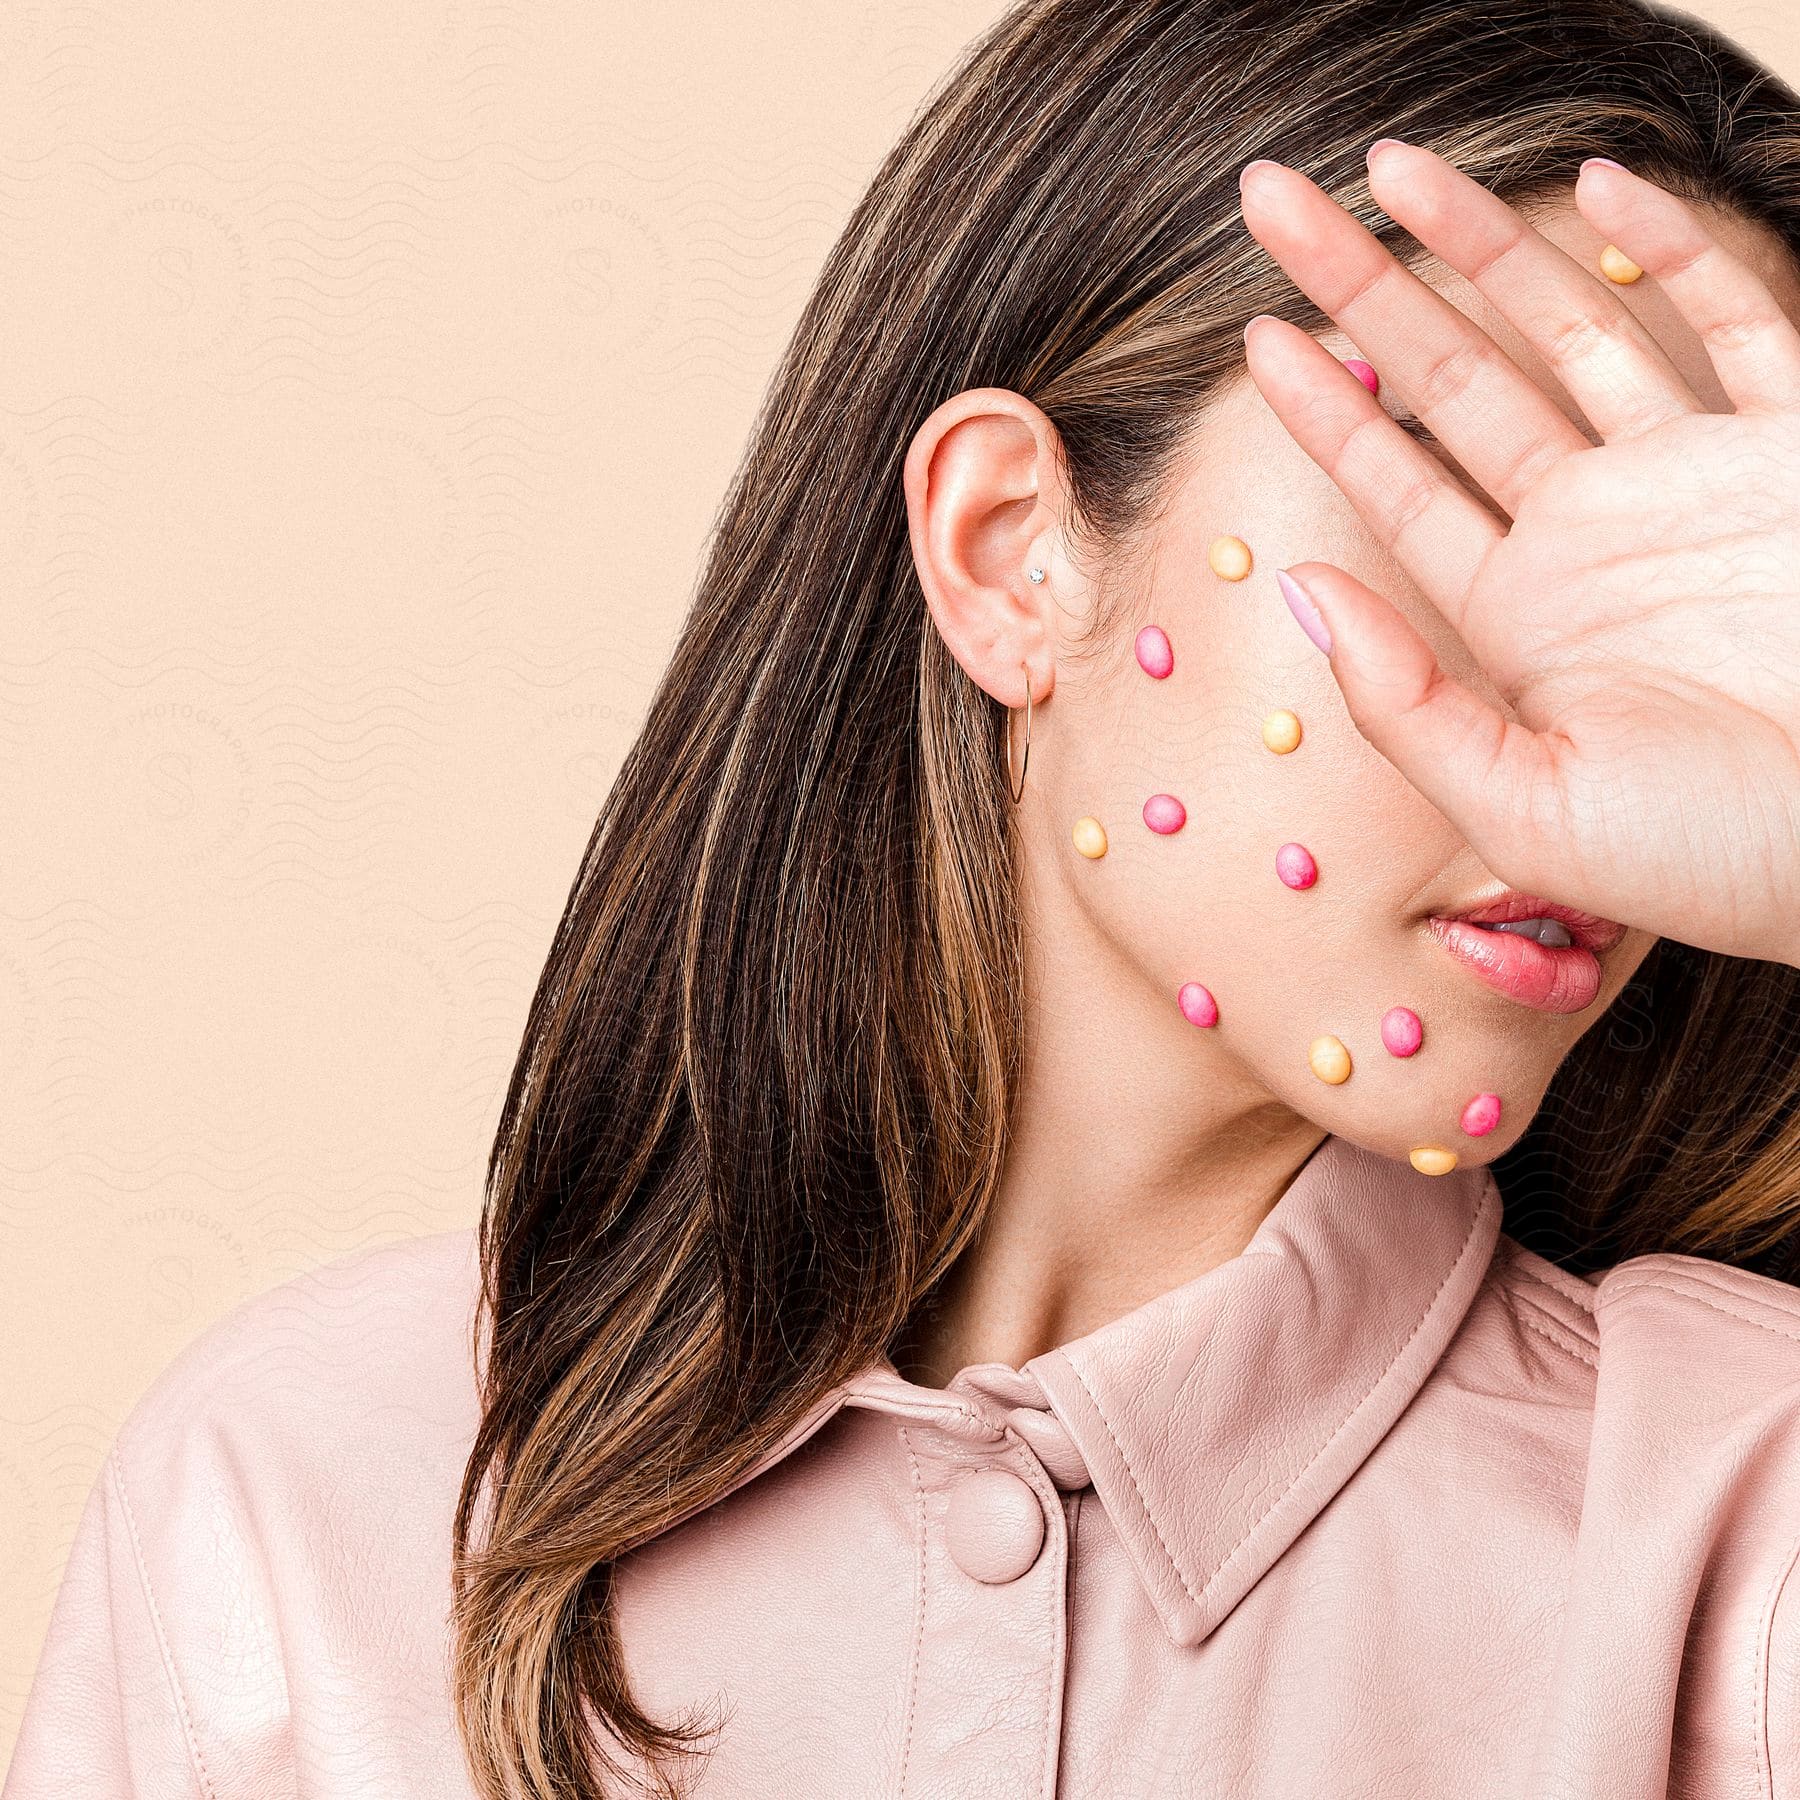 A woman with colored dots on her face puts her hand in front of her eyes as she turns her head